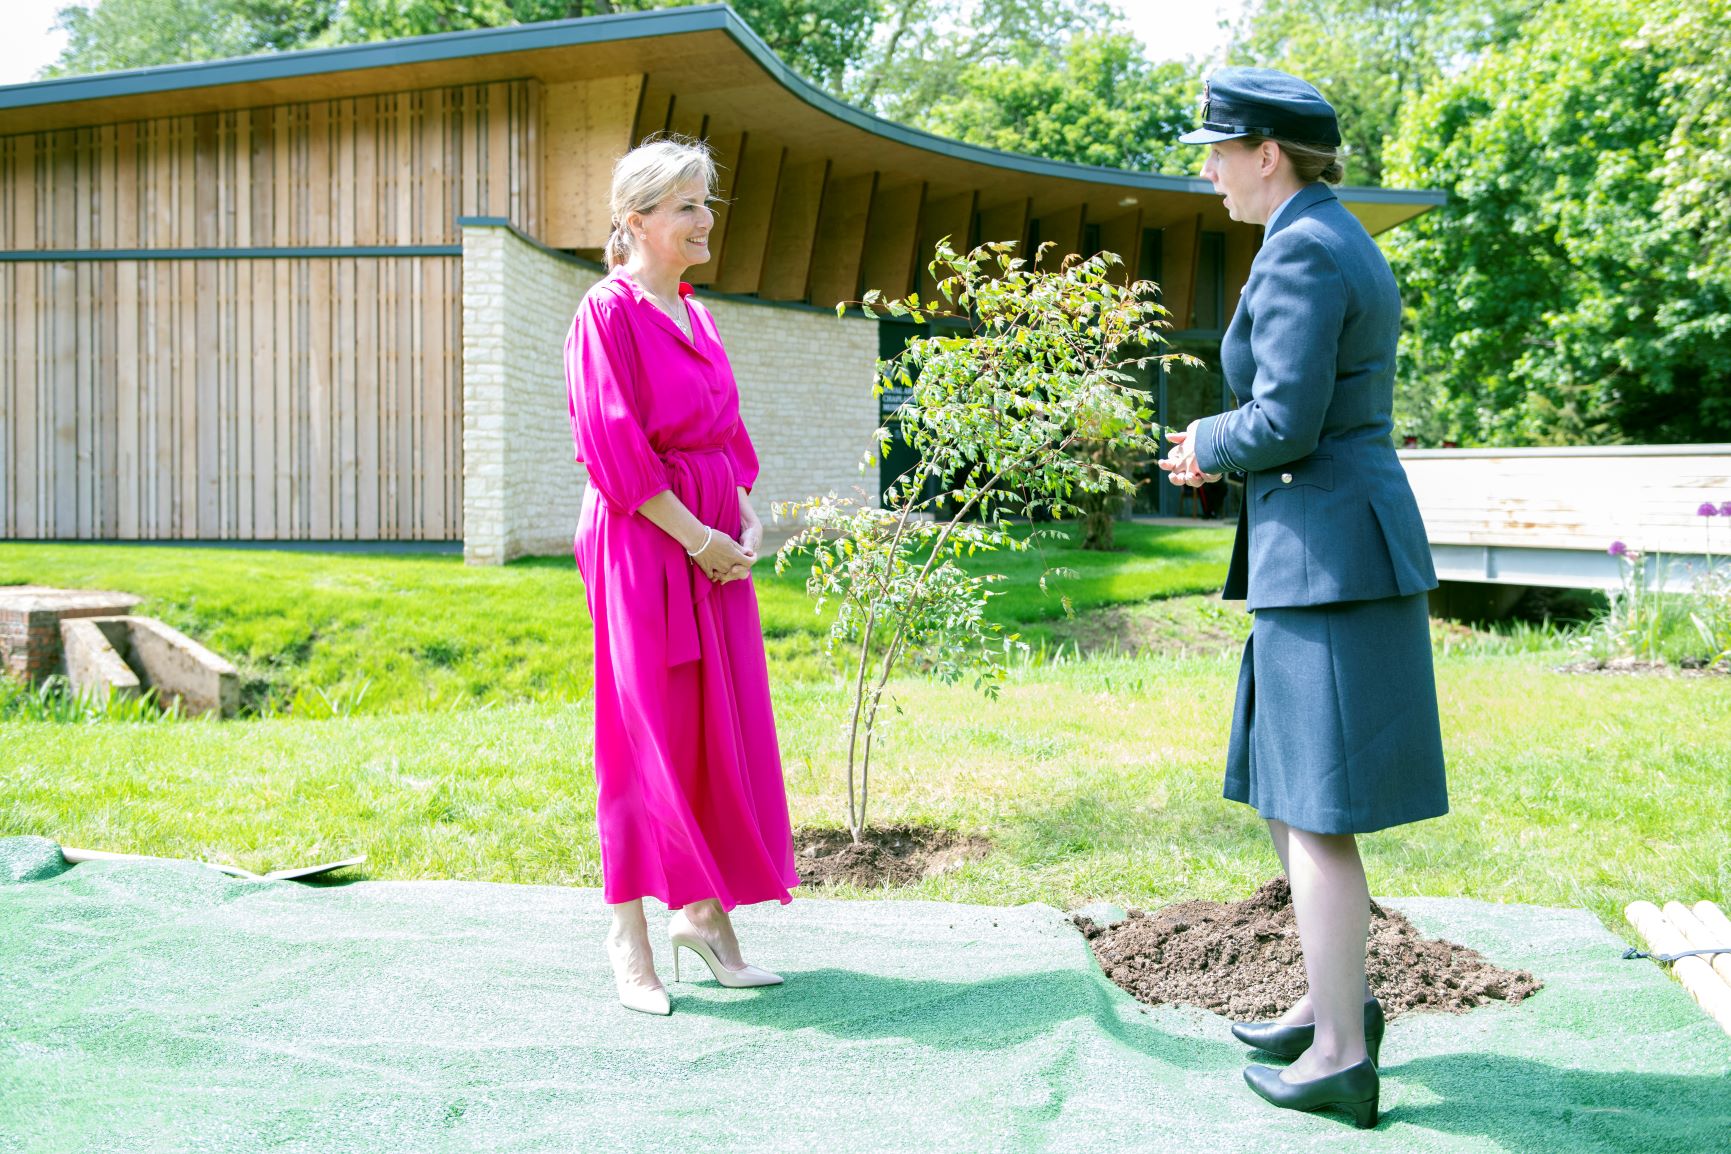 HRH The Countess of Wessex outside the museum where a sapling has been planted as part of the Queen's Green Canopy